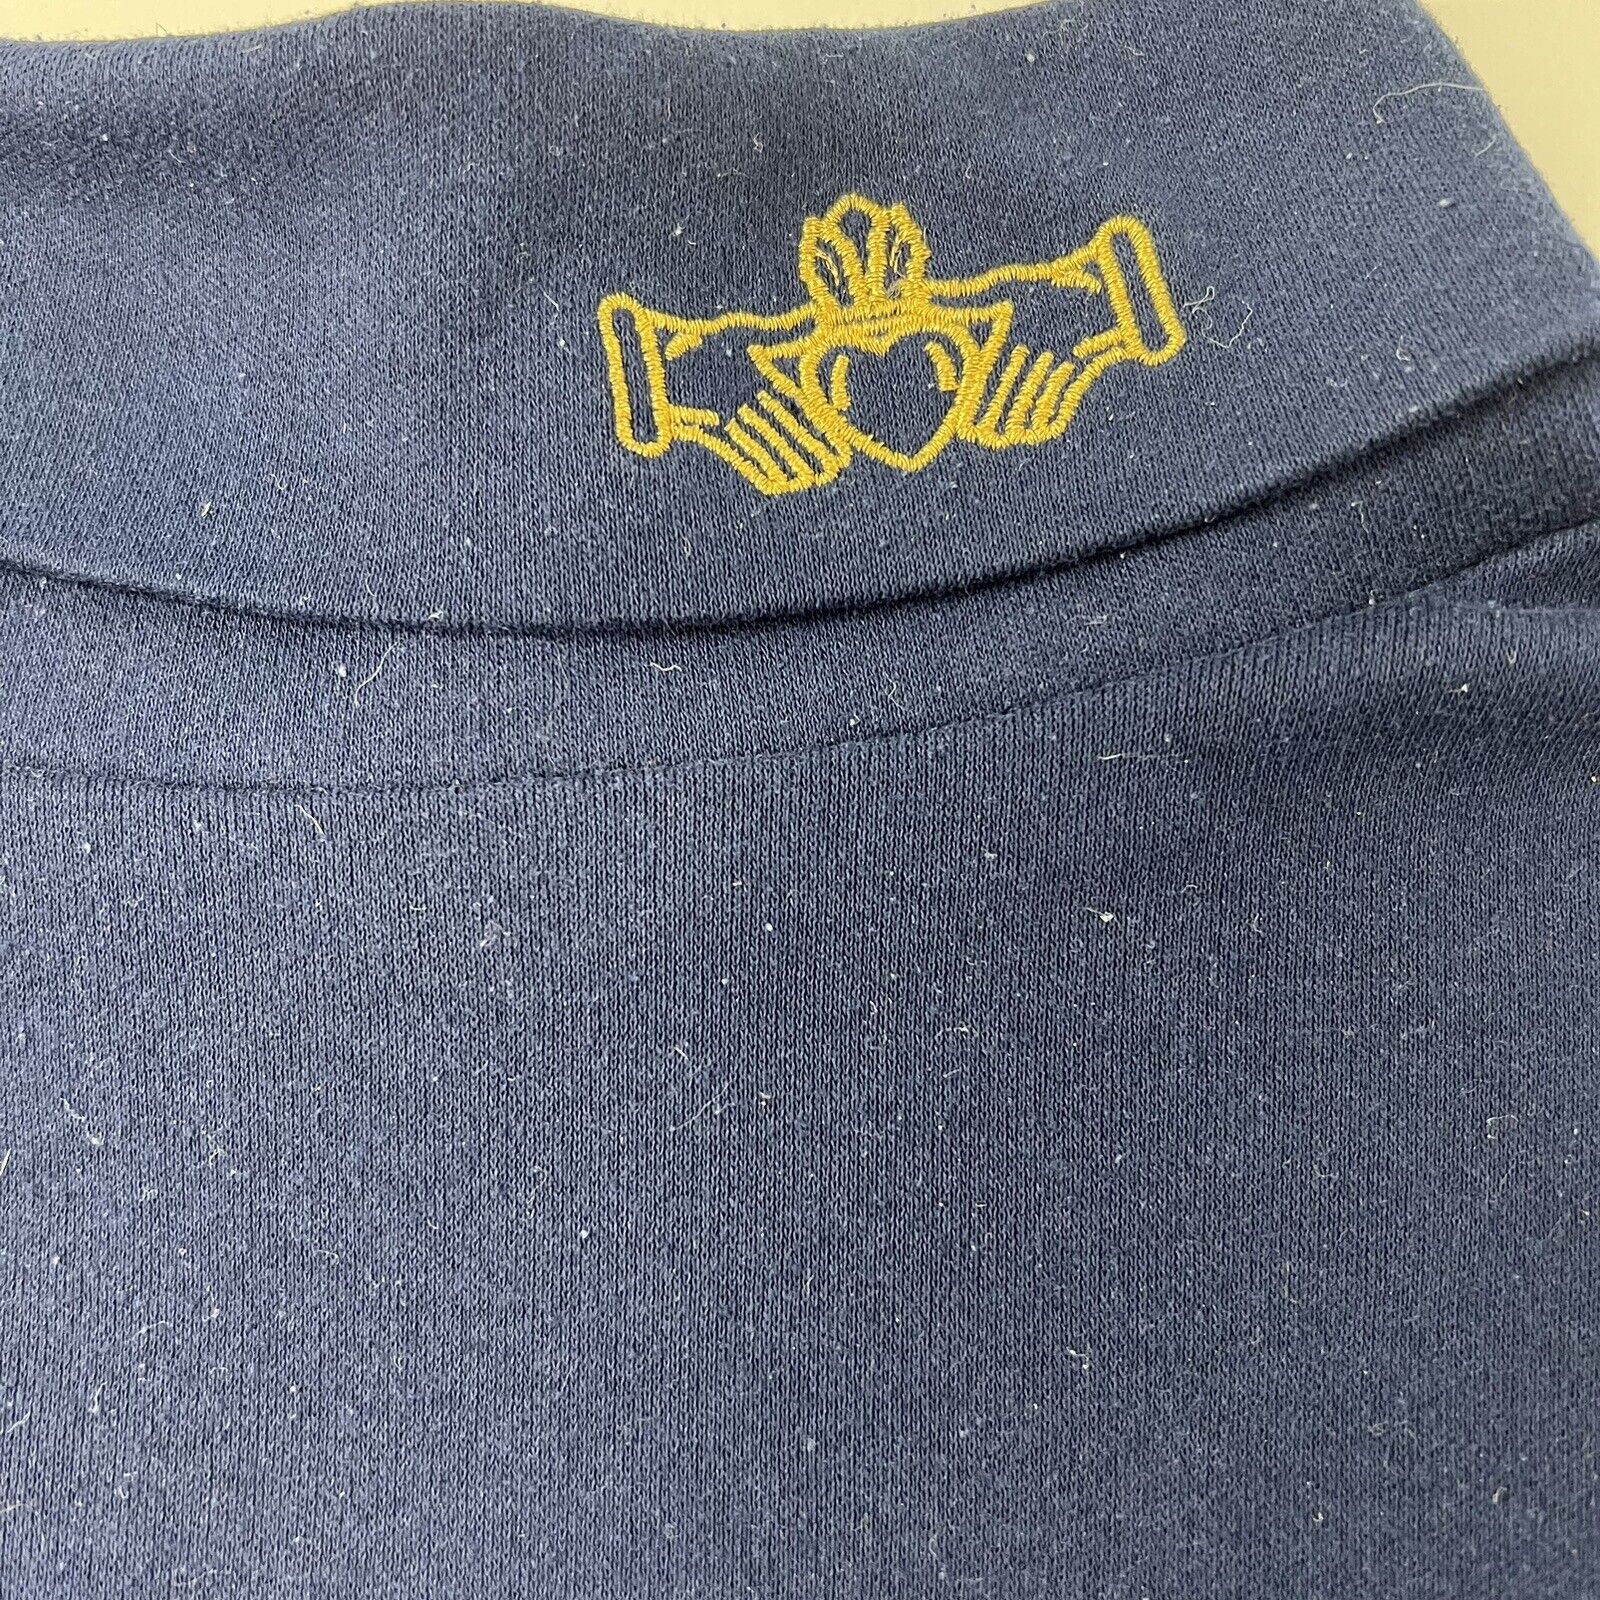 Vintage Womens Navy w/ Gold Embroidered Claddagh … - image 2